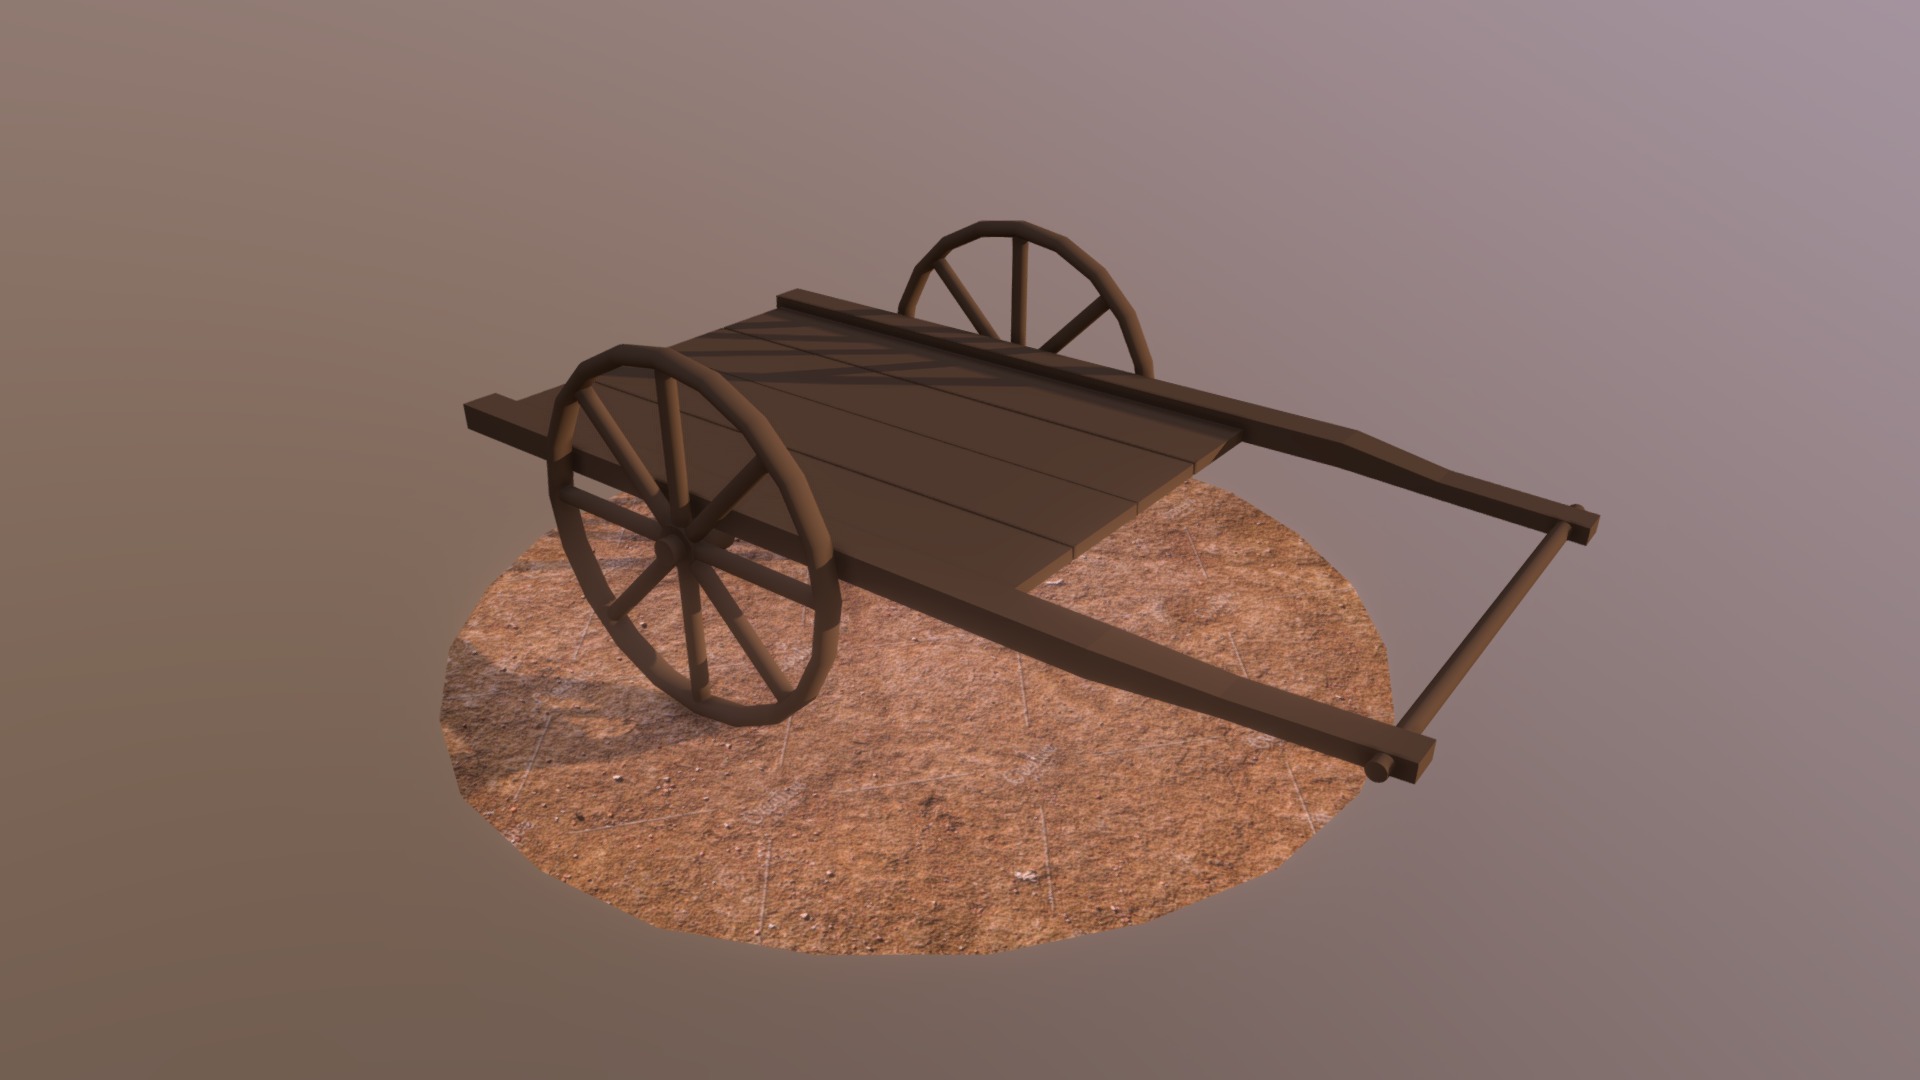 3D model Farm Cart - This is a 3D model of the Farm Cart. The 3D model is about a wooden chair on a carpet.